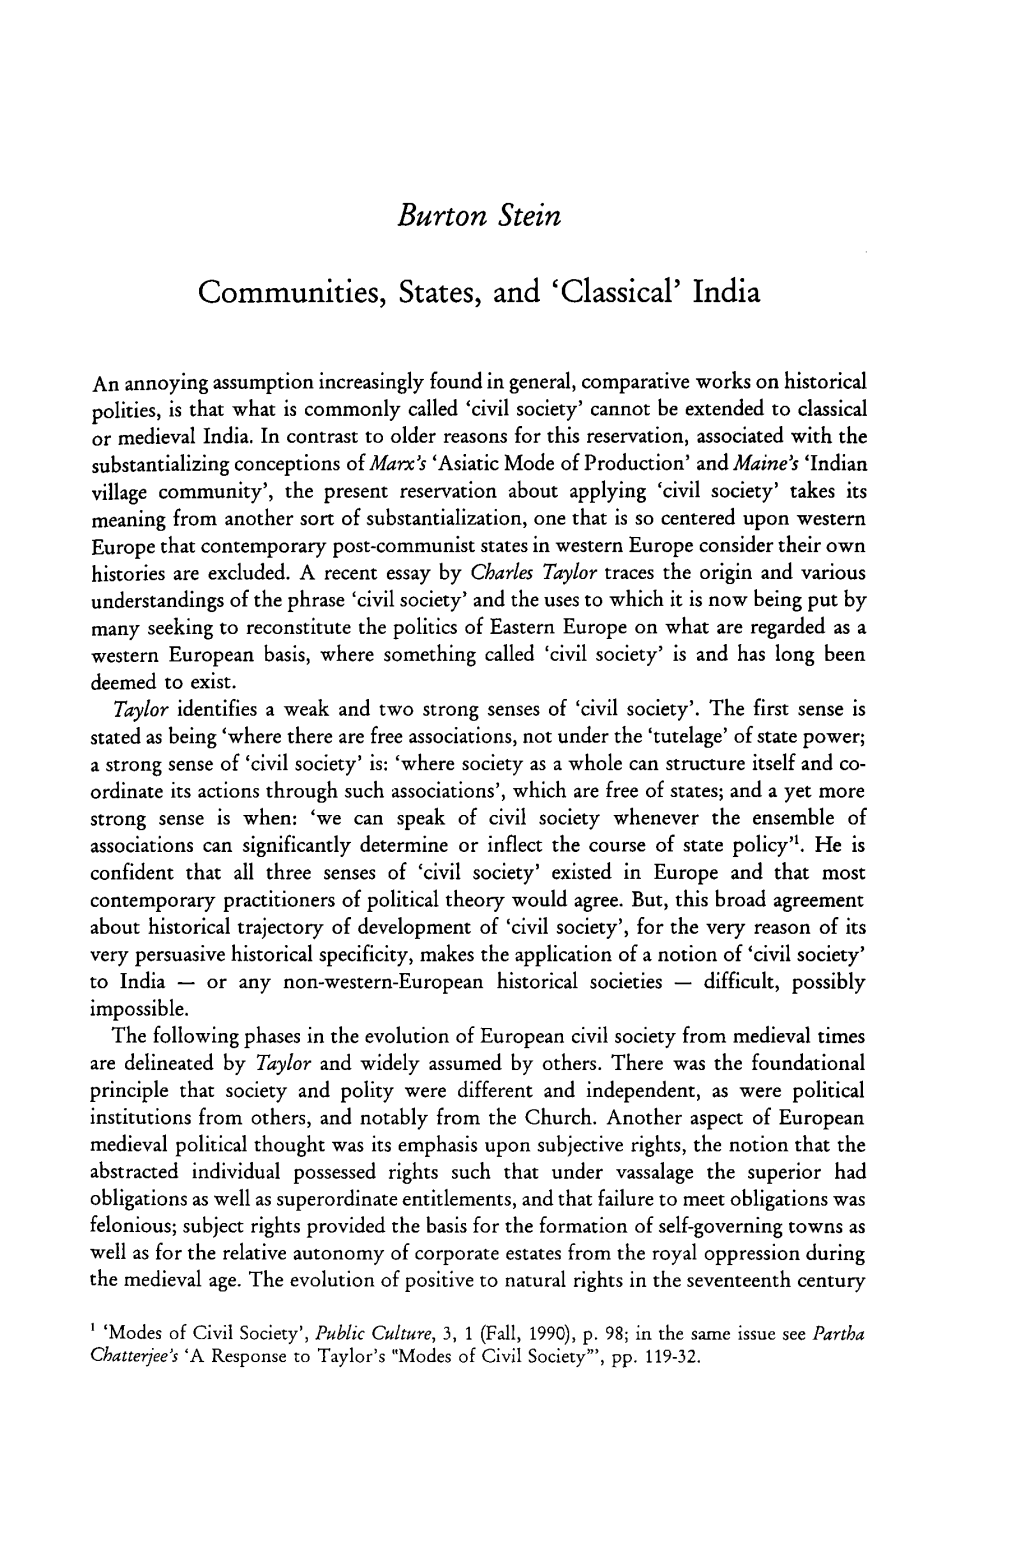 Communities, States, and 'Classical' India